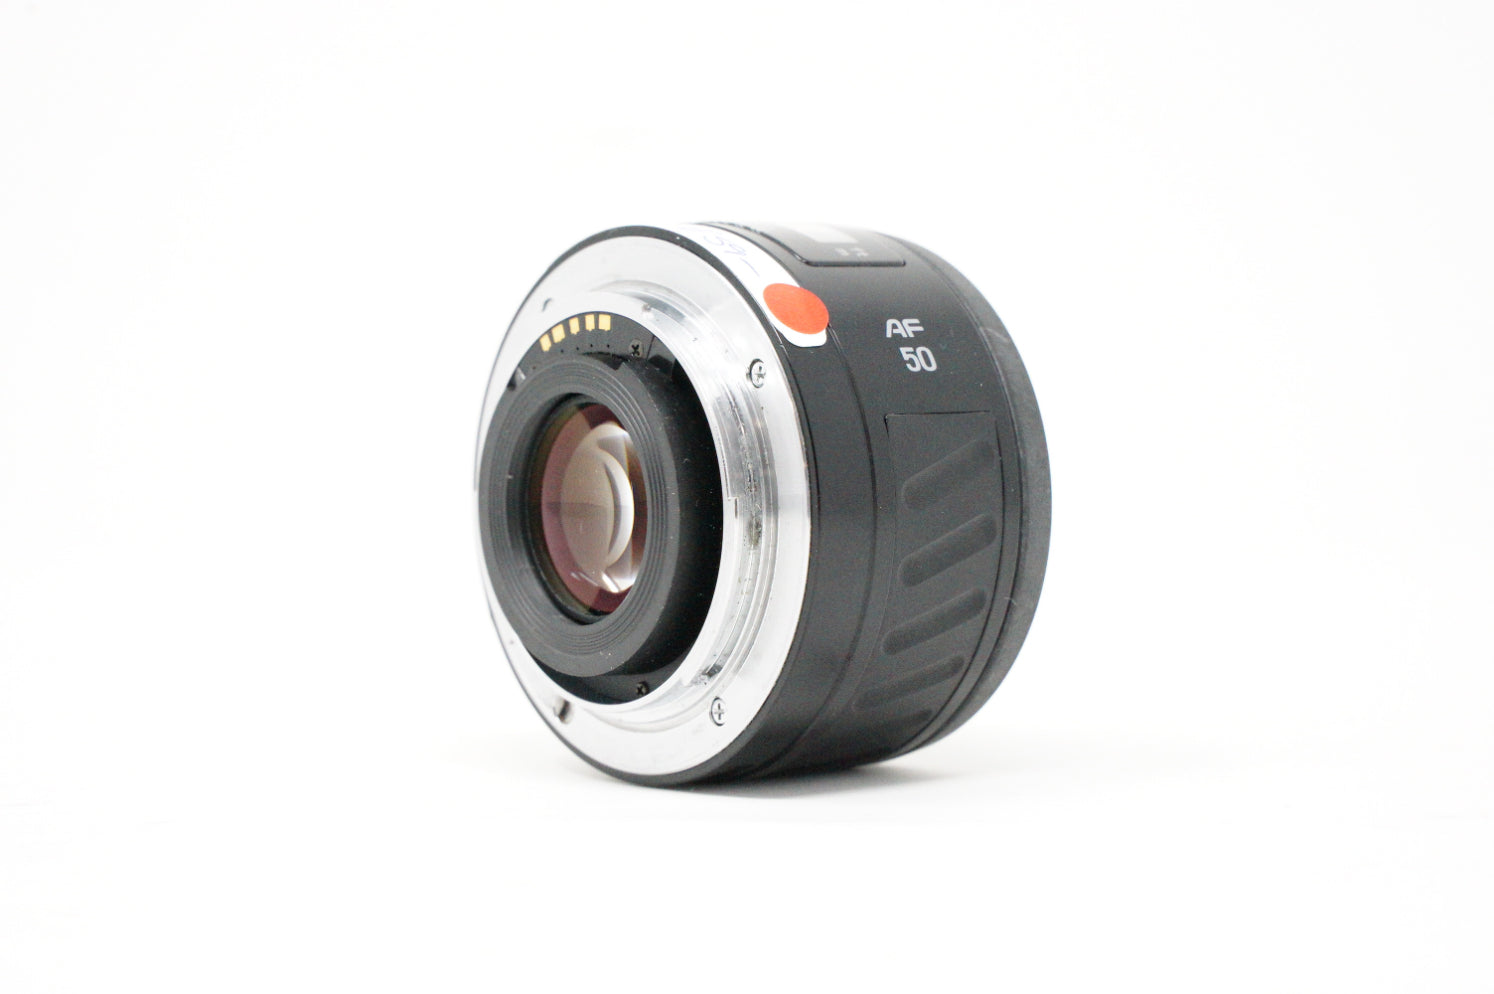 Used Minolta AF 50mm F1.7 lens in Sony A mount